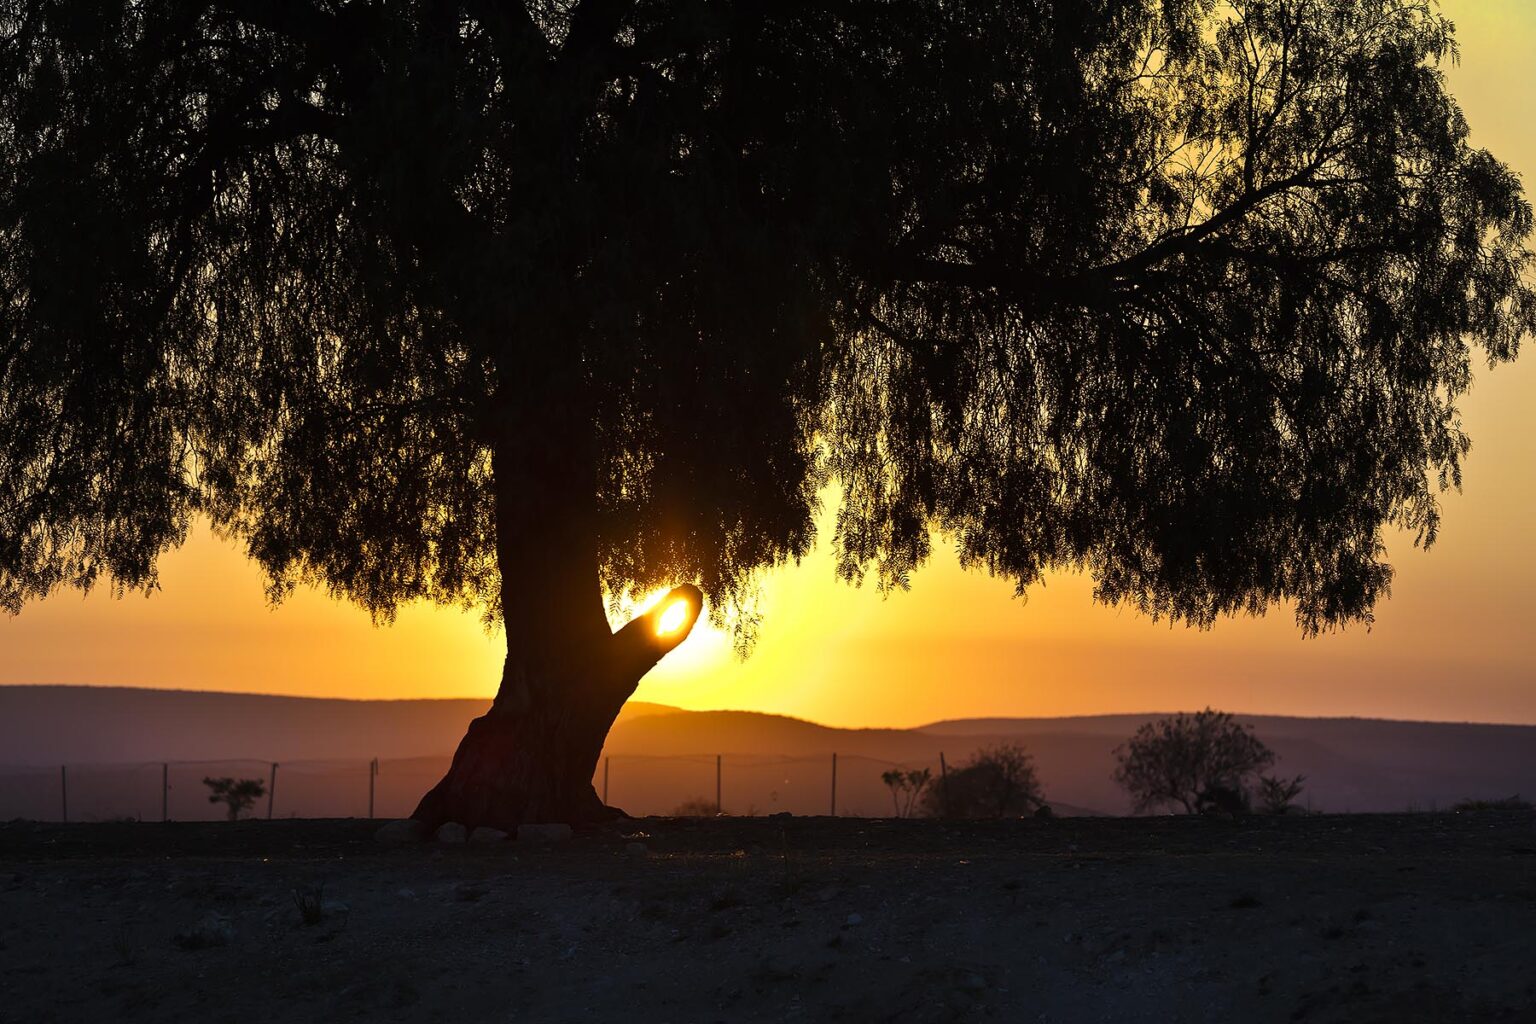 A sunset silhouettes a magnificent tree - MINERAL DE POZOS, MEXICO